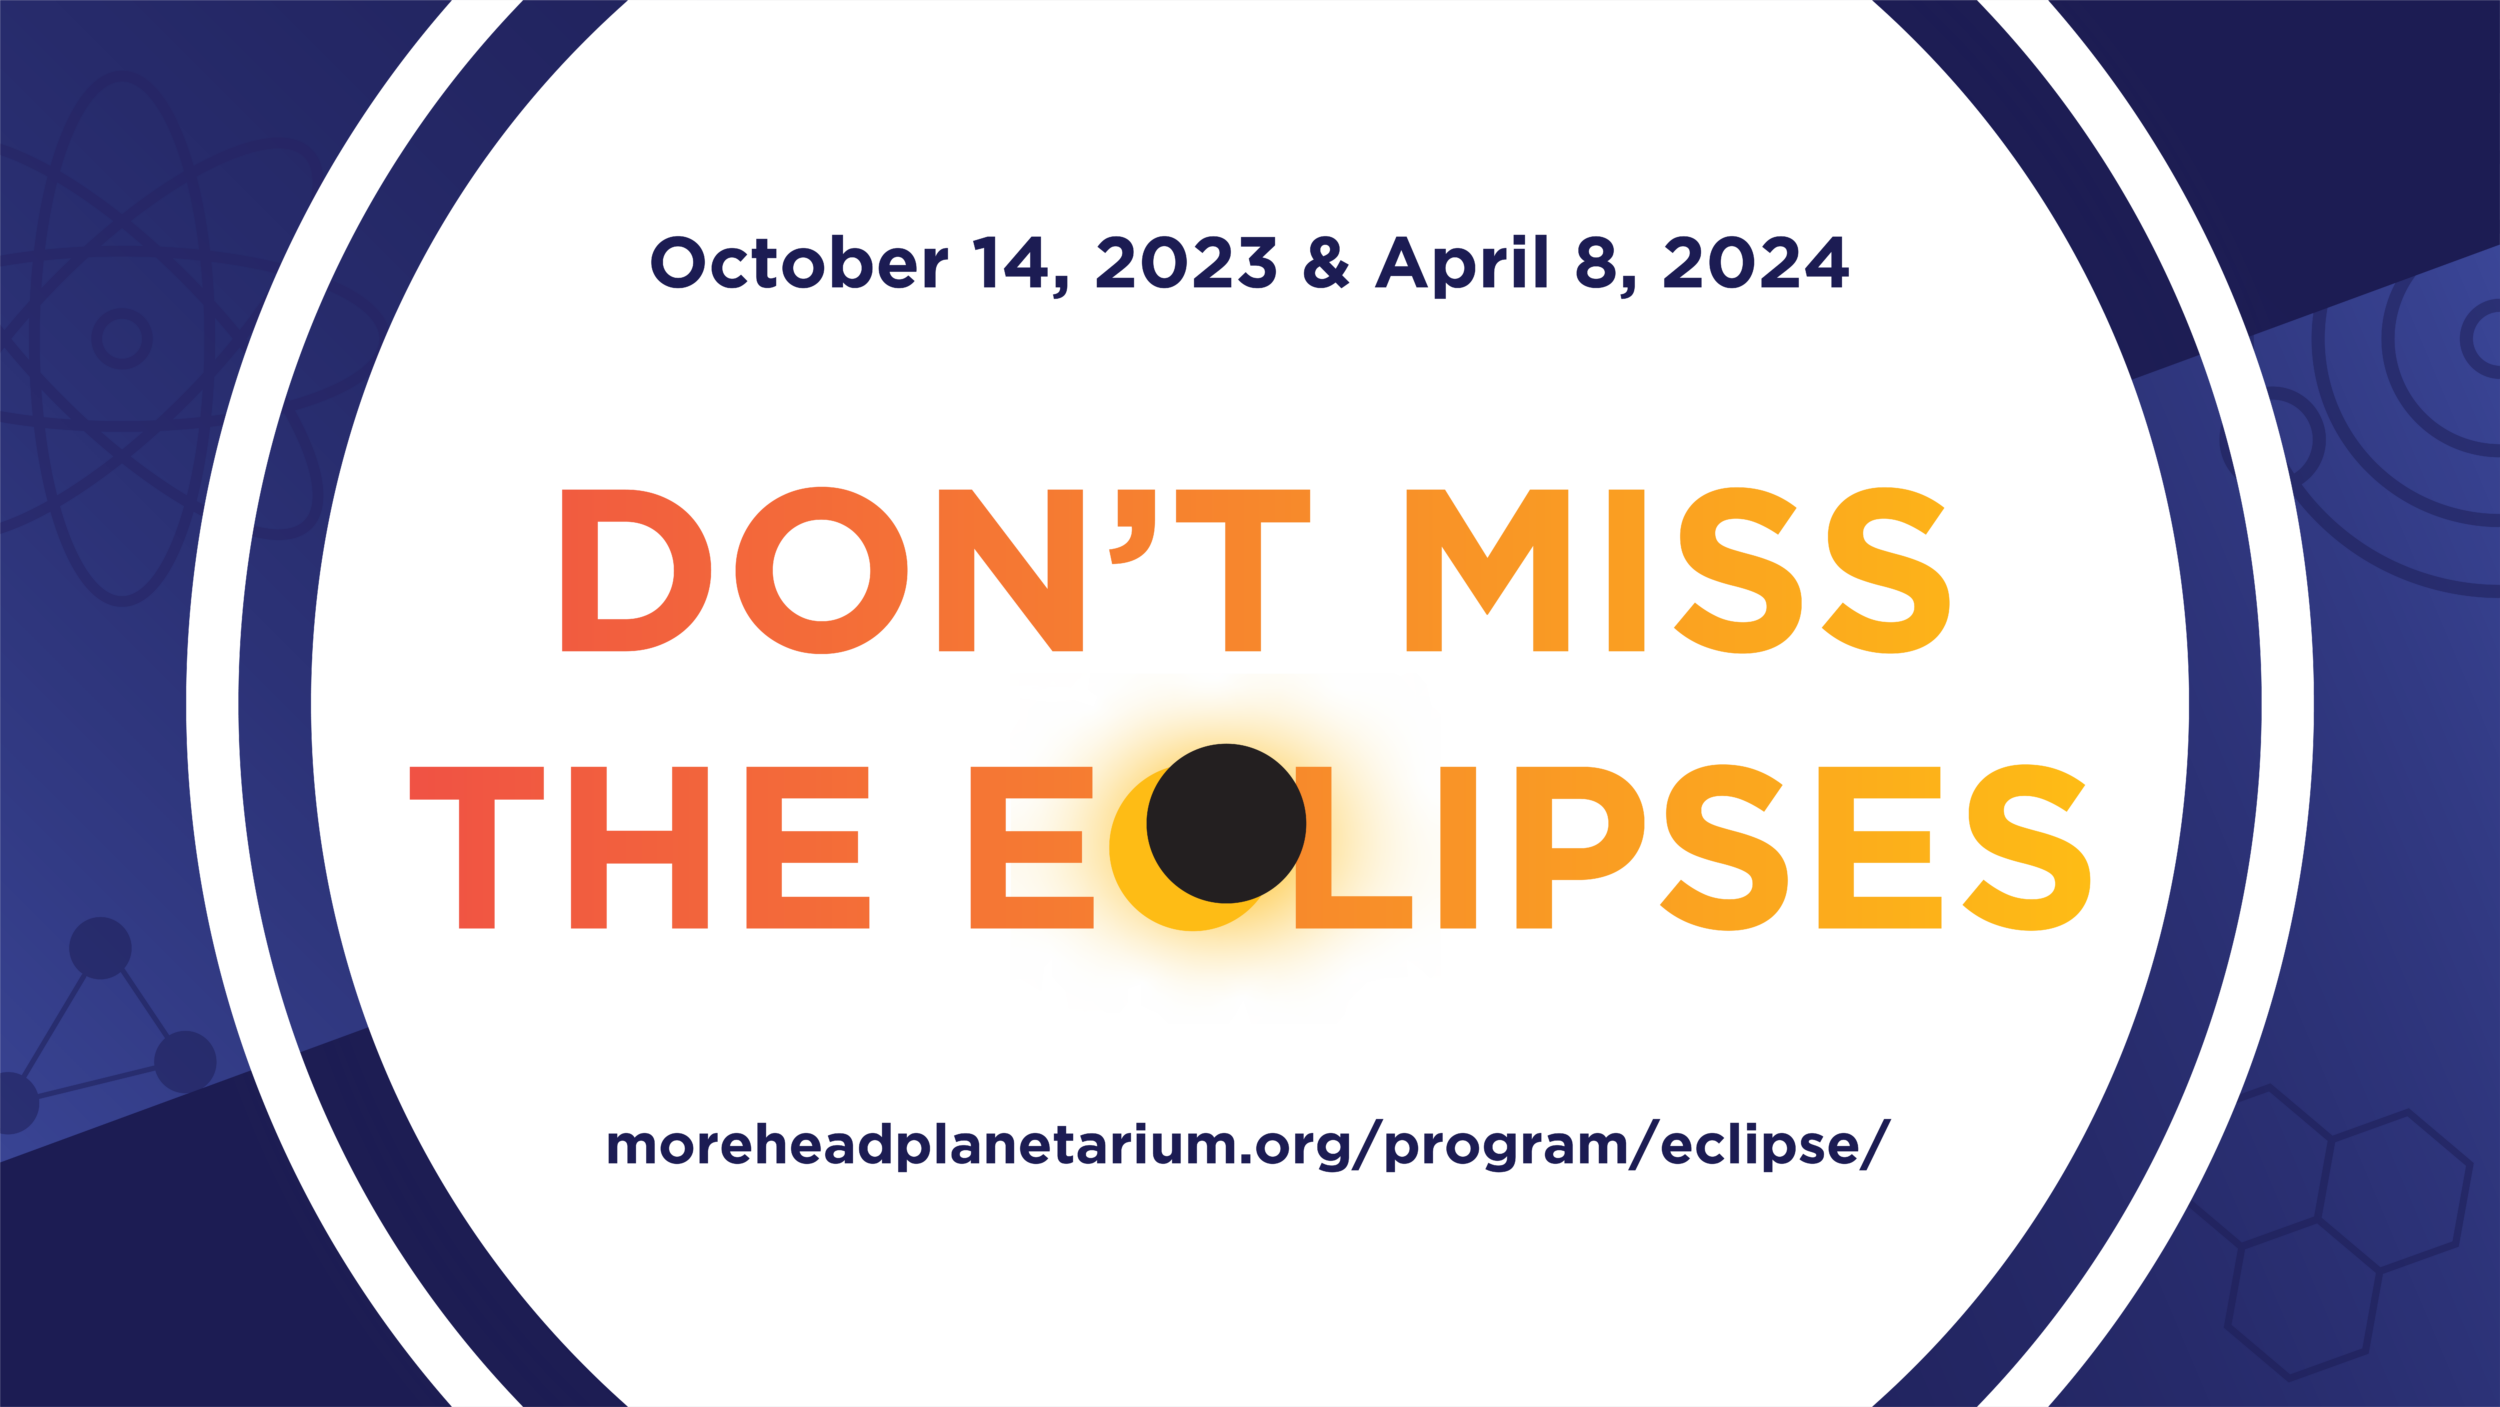 A dark blue and purple gradated background with vector images of our Solar System, an atom, triangles, and hexagons. There is a white circle in the middle with the text, "October 14, 2023 & April 8, 2024: Don't Miss the Eclipses.